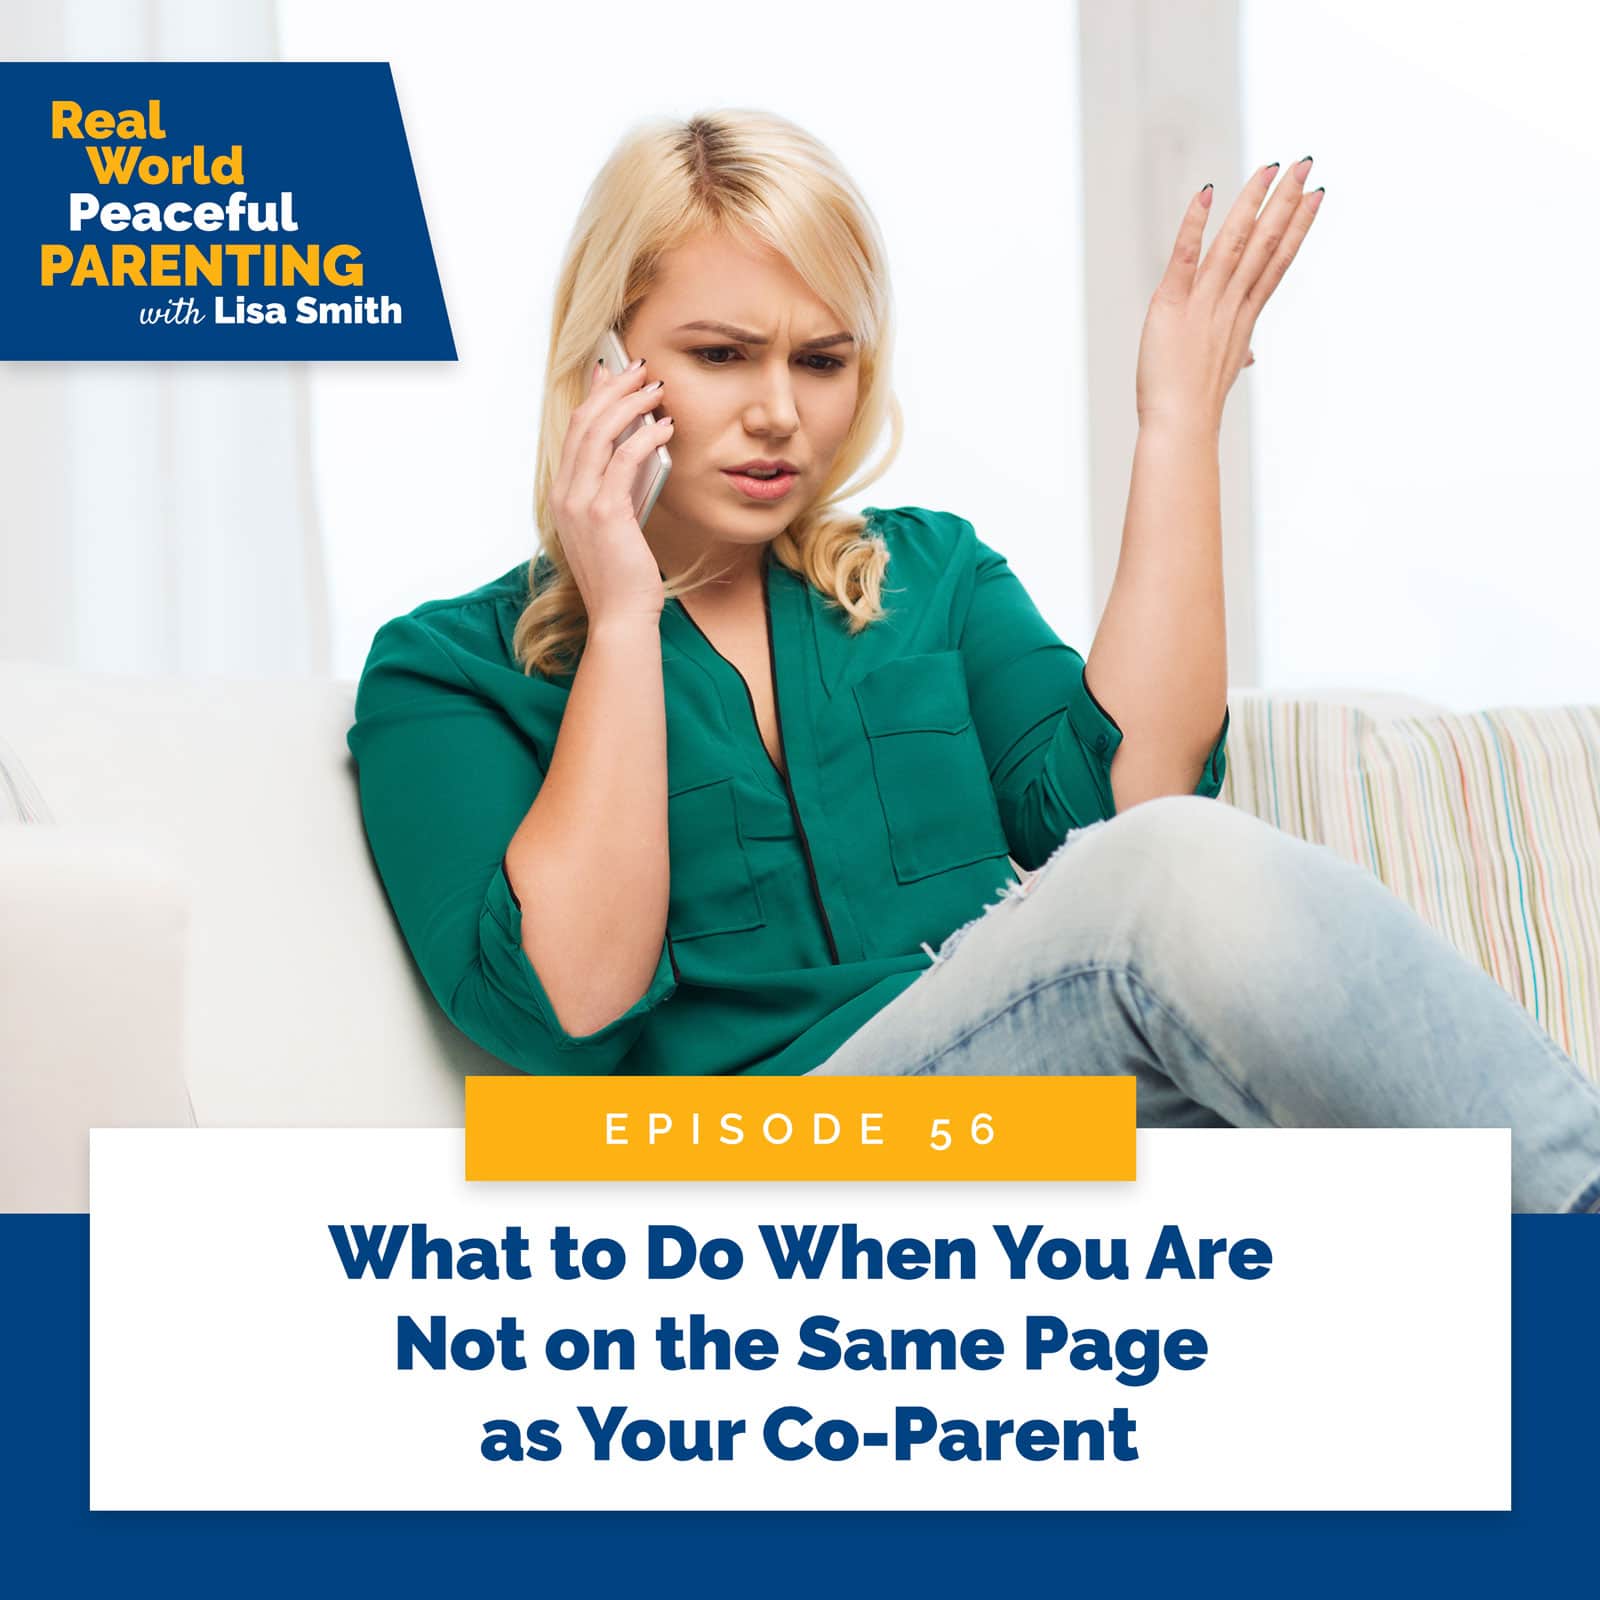 Real World Peaceful Parenting with Lisa Smith | What to Do When You Are Not on the Same Page as Your Co-Parent